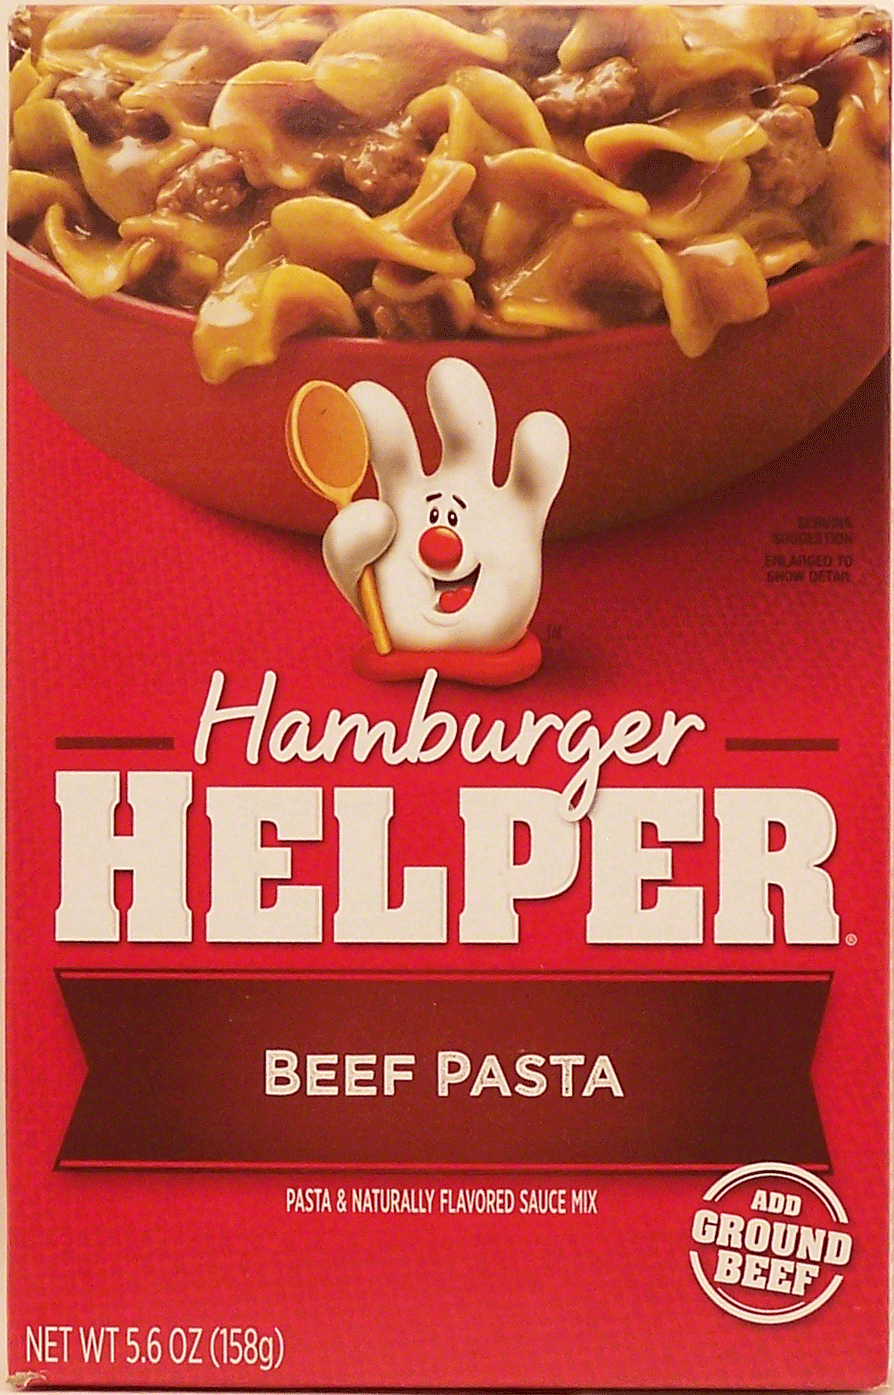 Betty Crocker Hamburger Helper beef pasta: pasta and sauce mix, makes 5 1-cup servings Full-Size Picture